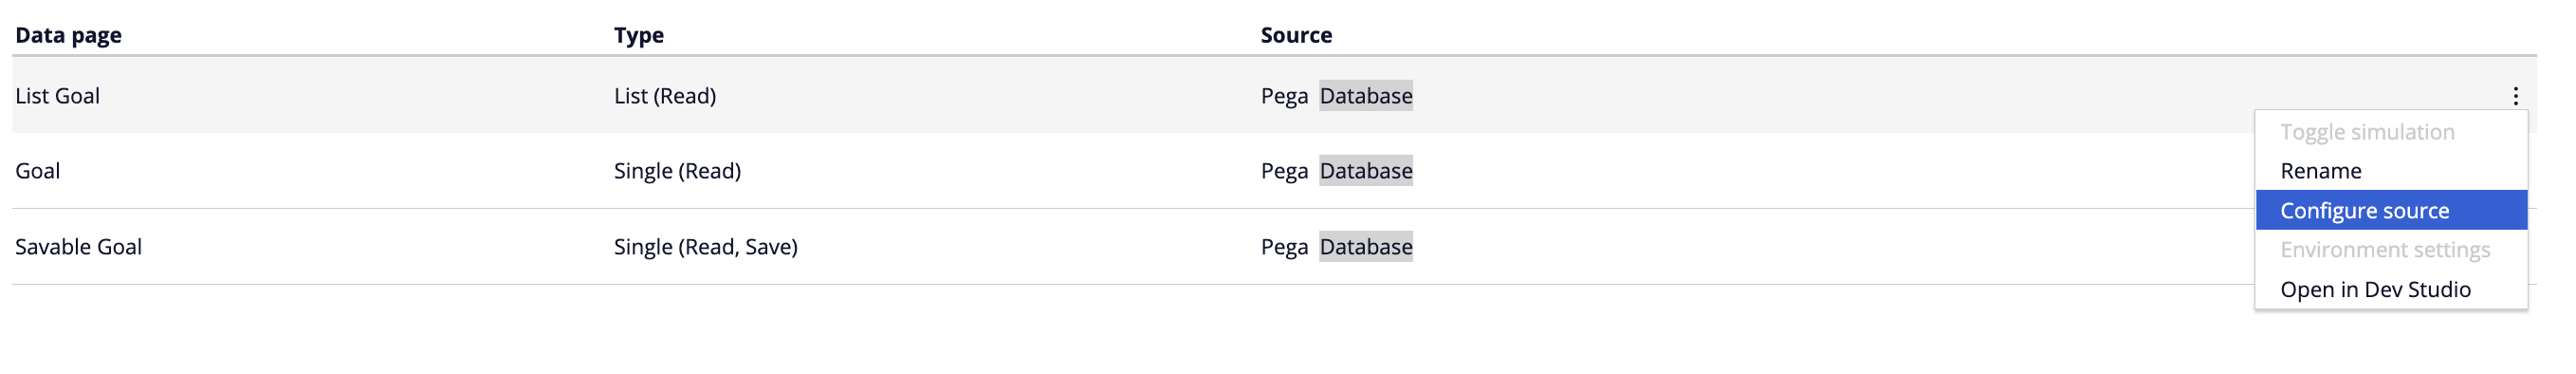 replace source for data page